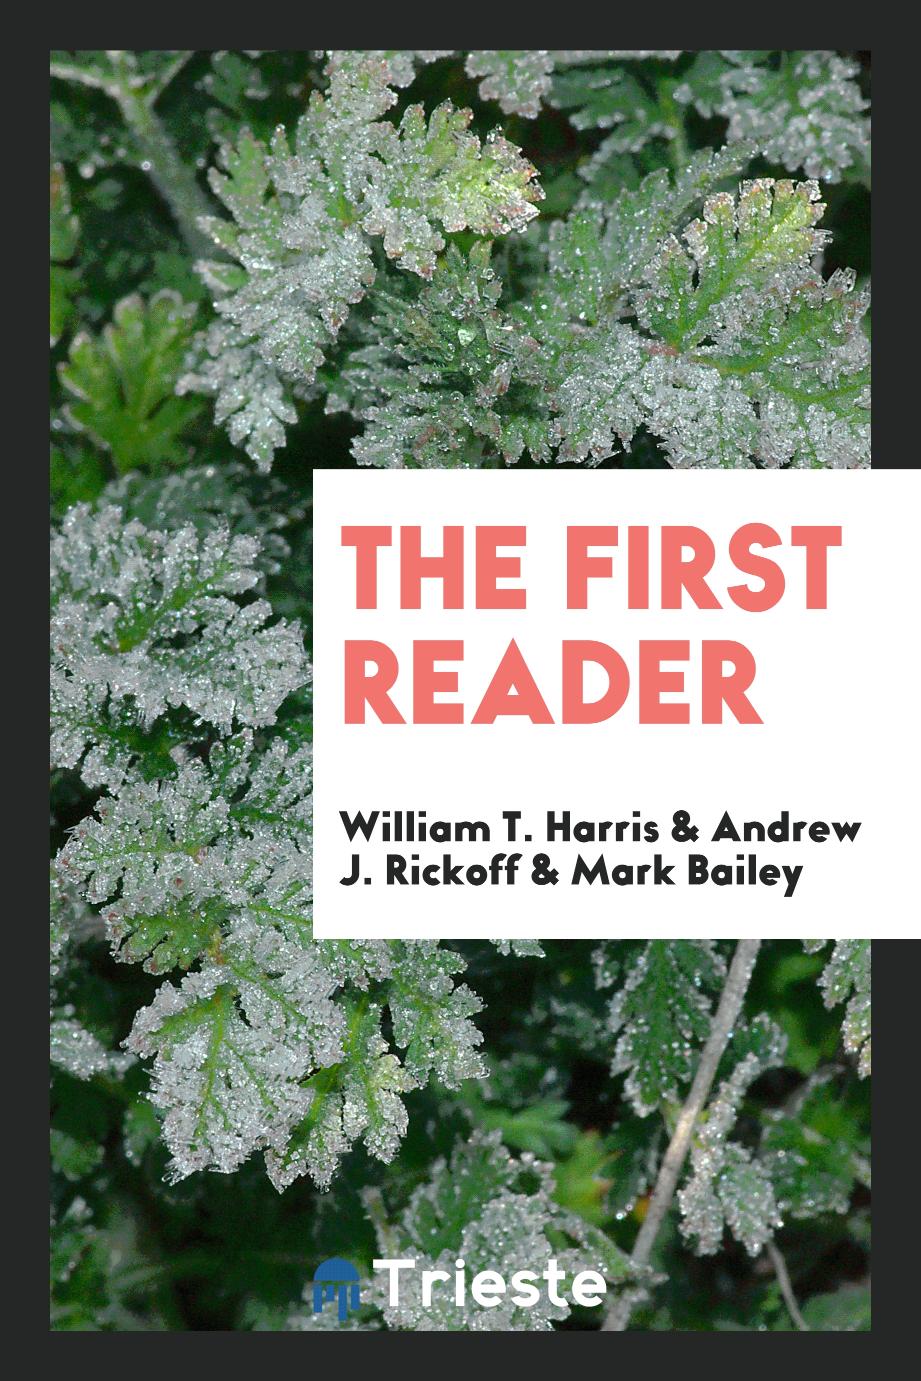 The First Reader